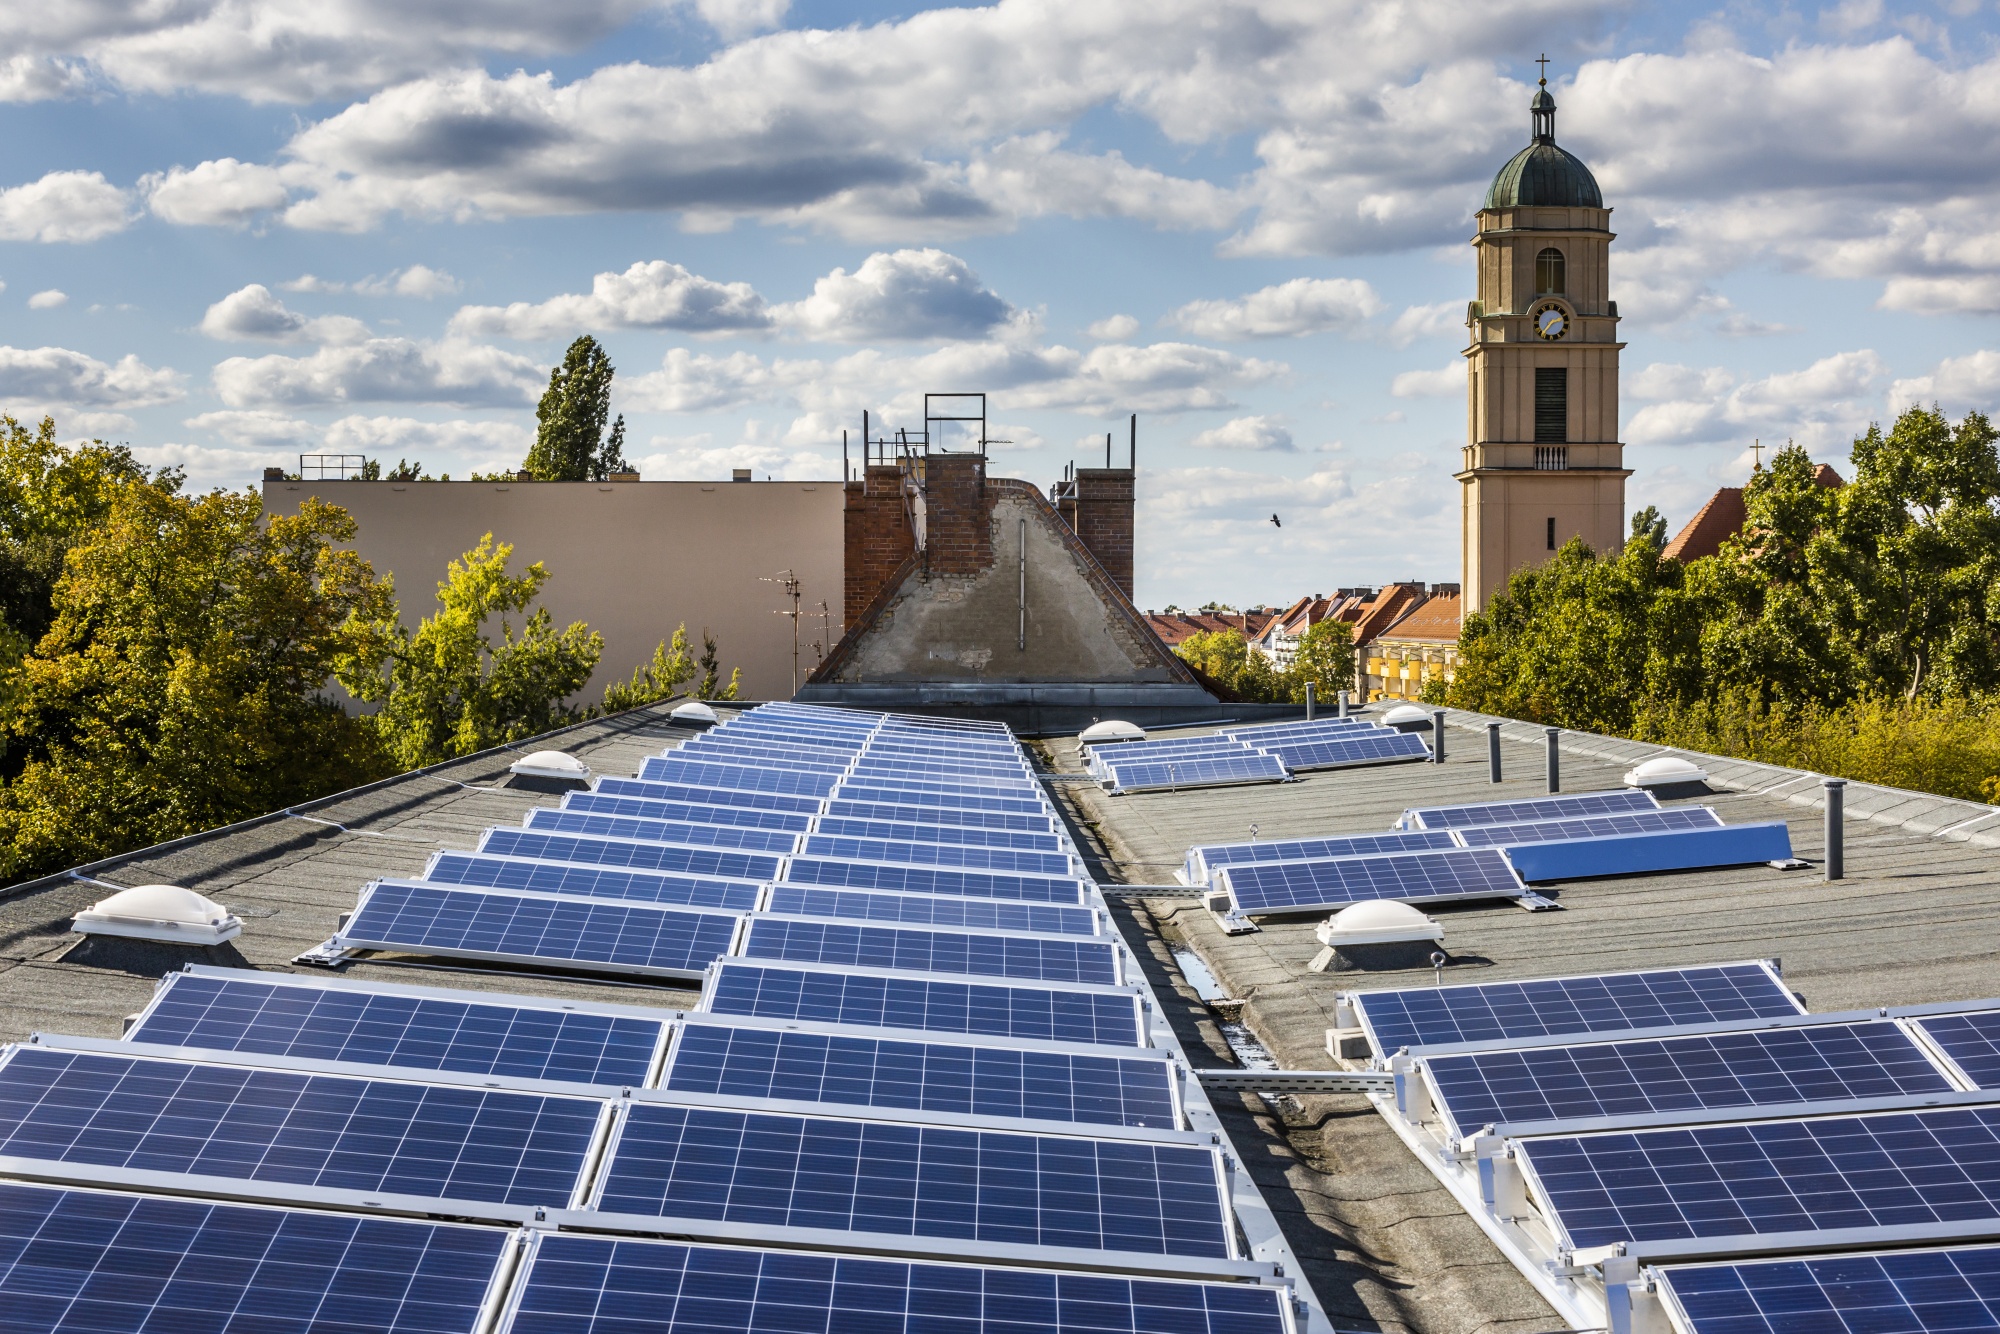 Newly installed solar panels sit on the roof of an apartment block in the Pankow district of Berlin, Germany.